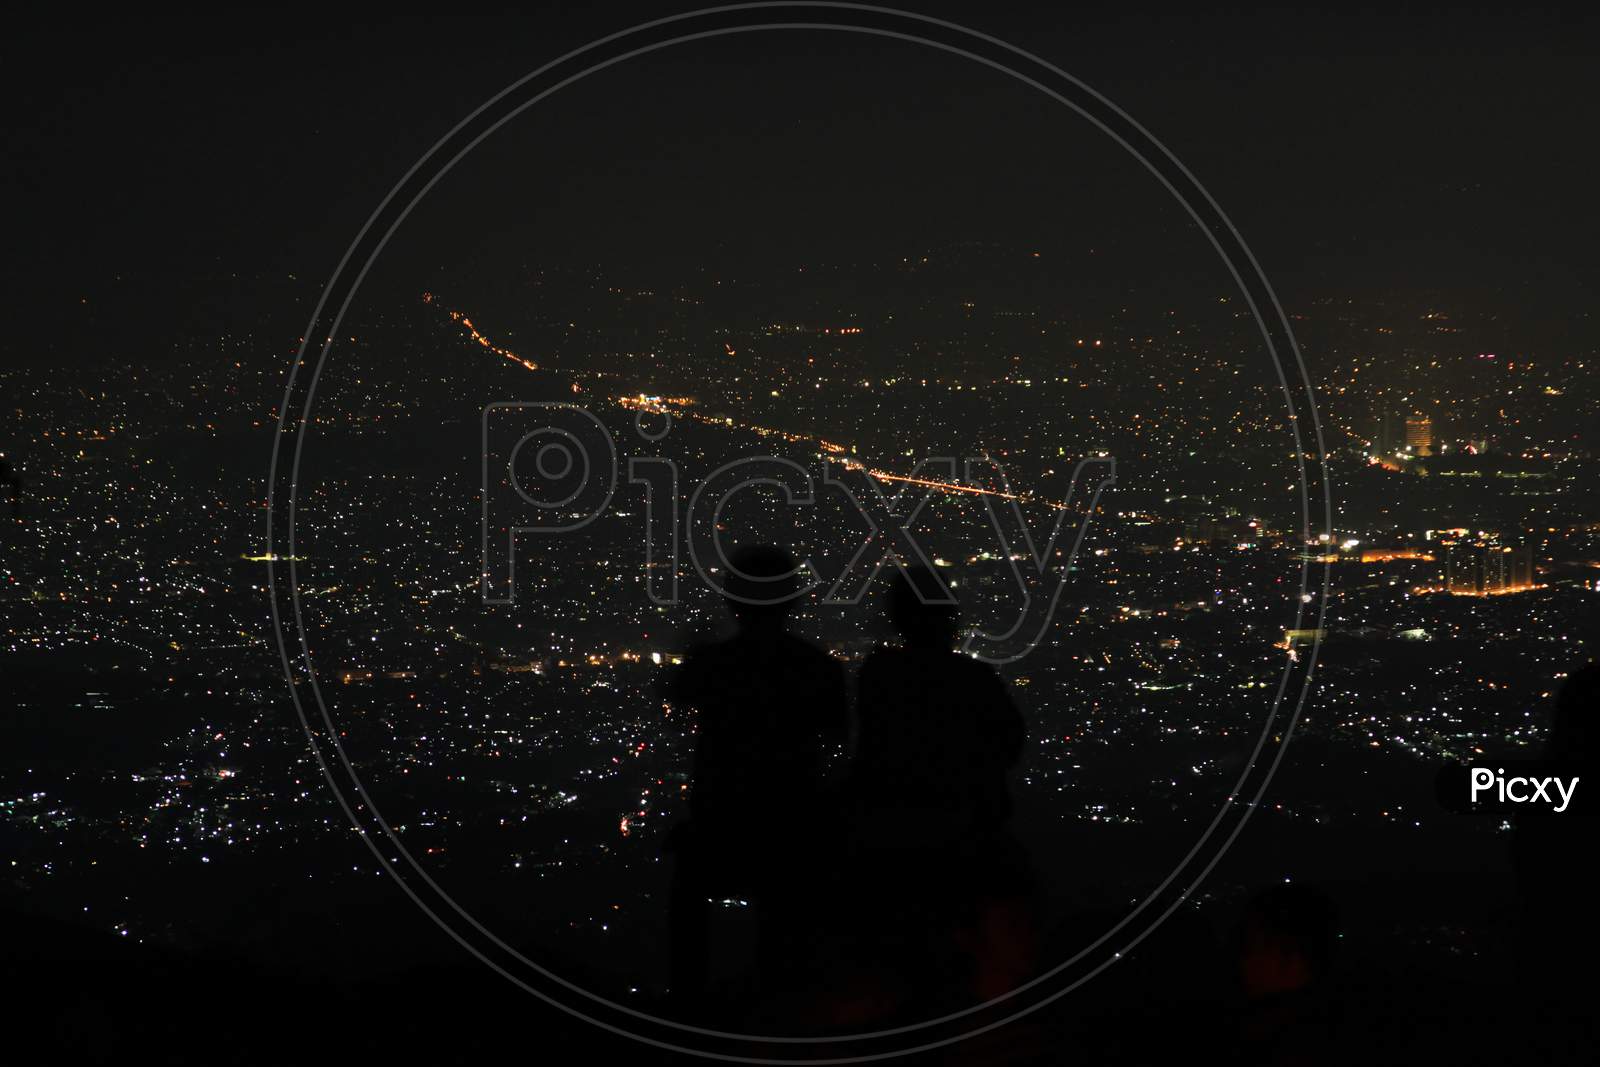 Couple Silhouette Above The City Lights At Night